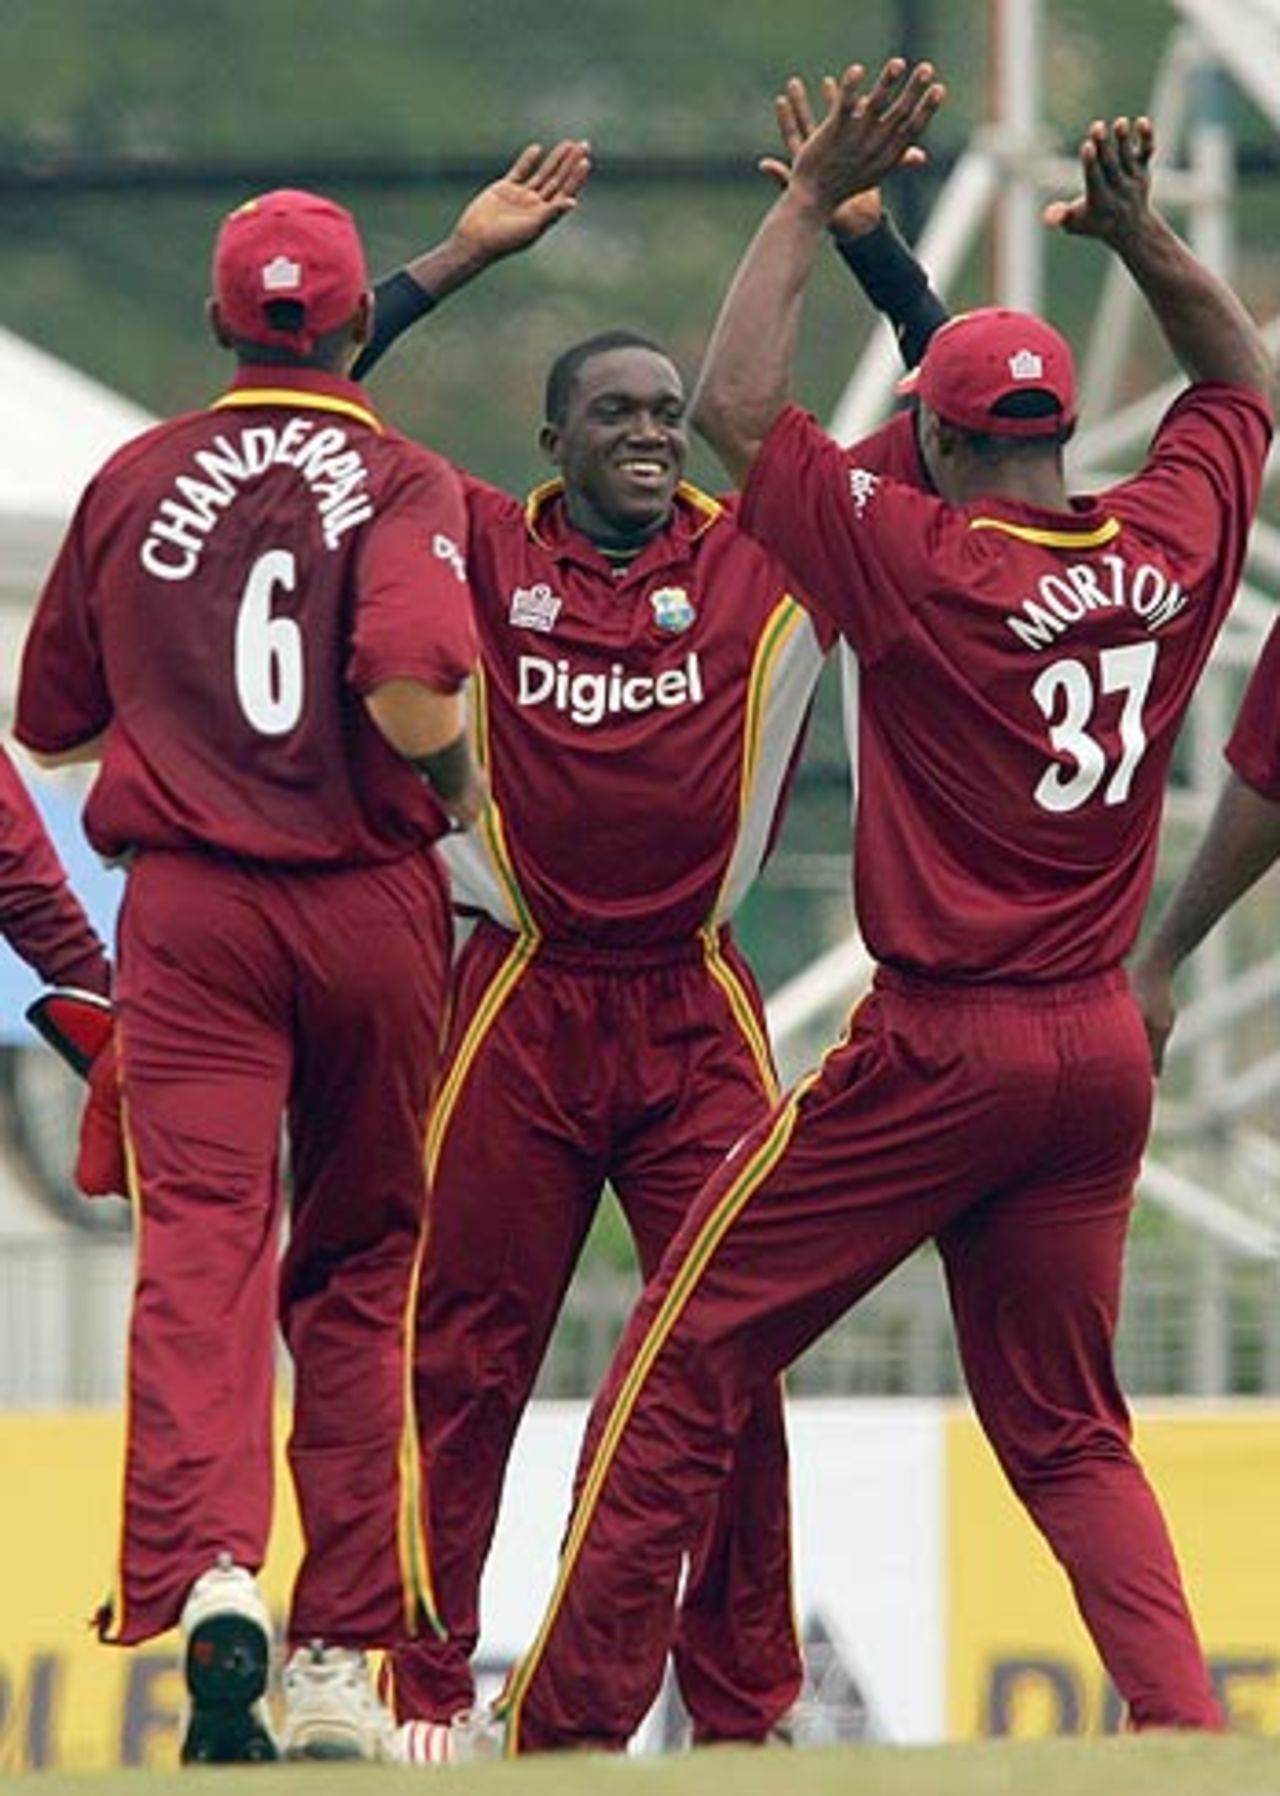 Jerome Taylor strikes with the wicket of Ricky Ponting, Australia v West Indies, DLF Cup final, September 24, 2006